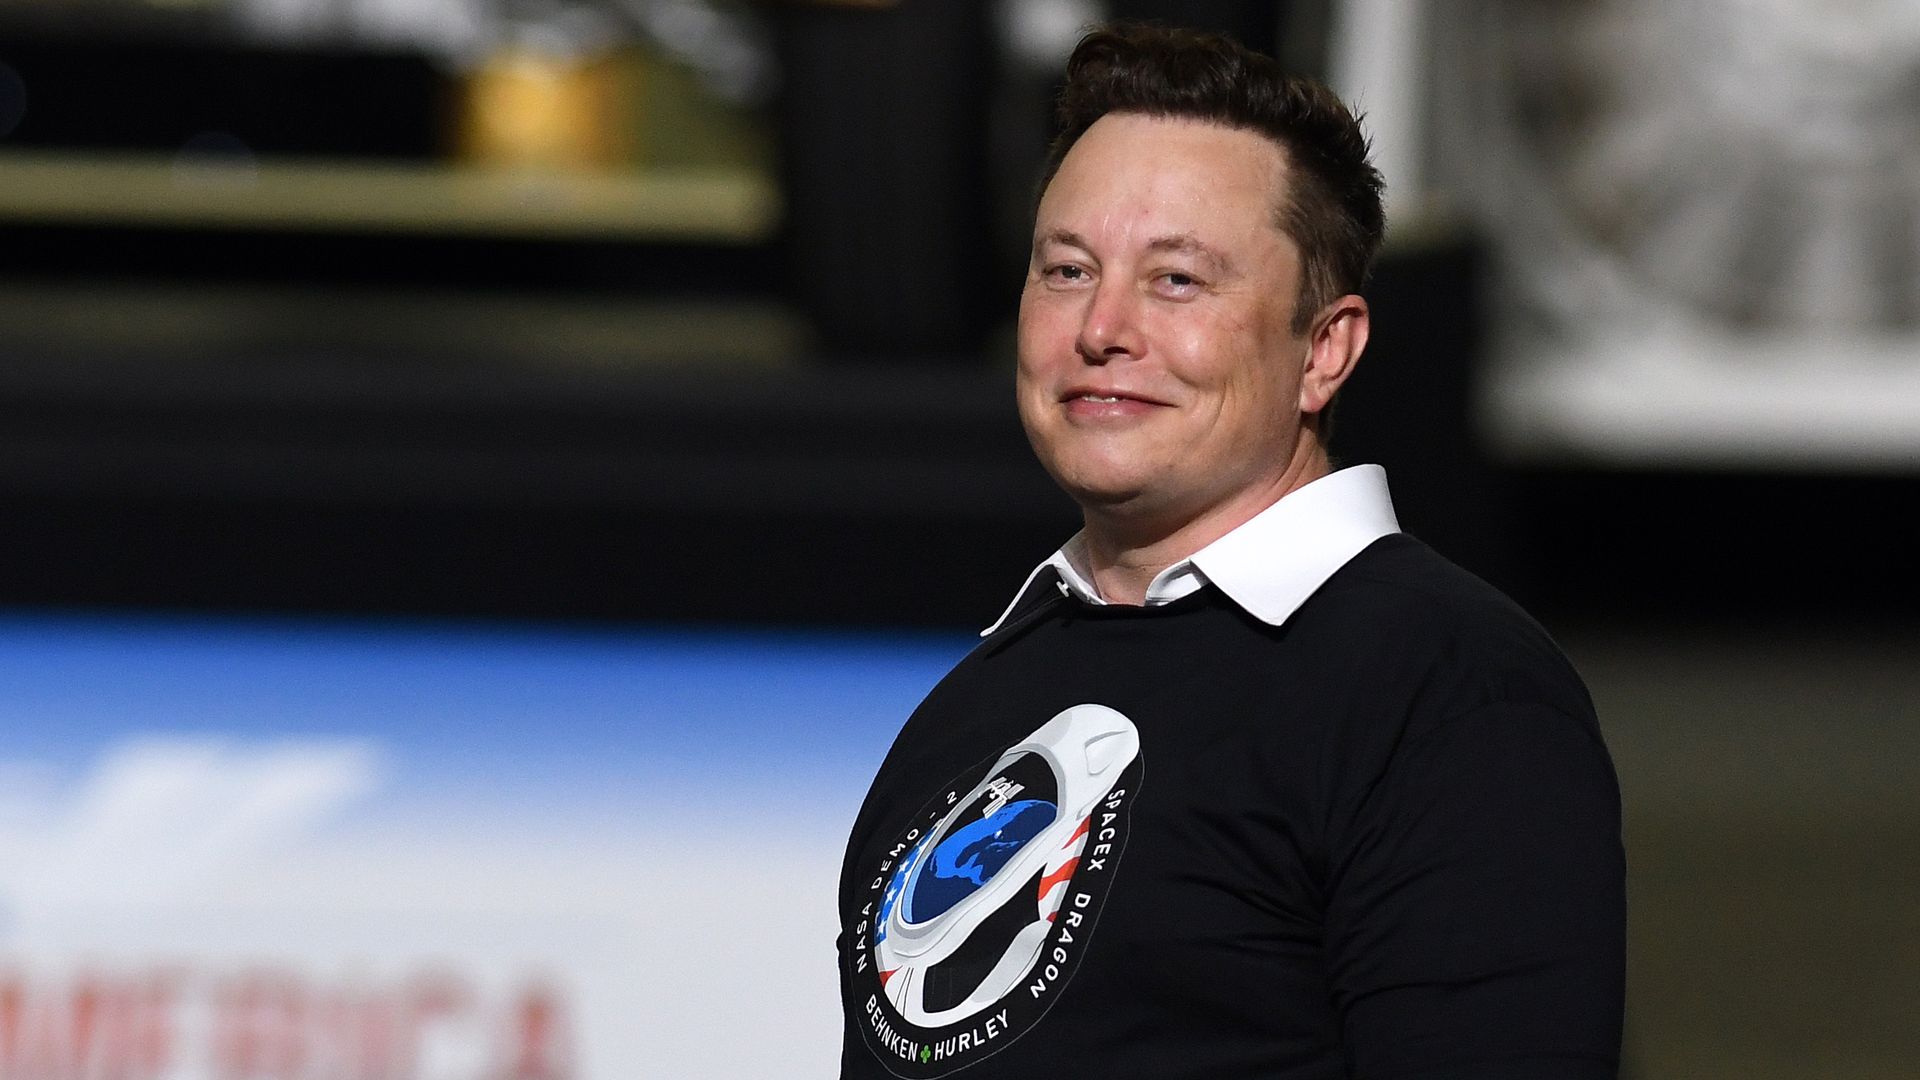 SpaceX founder Elon Musk looks on after being recognized by U.S. President Donald Trump at NASA's Vehicle Assembly Building